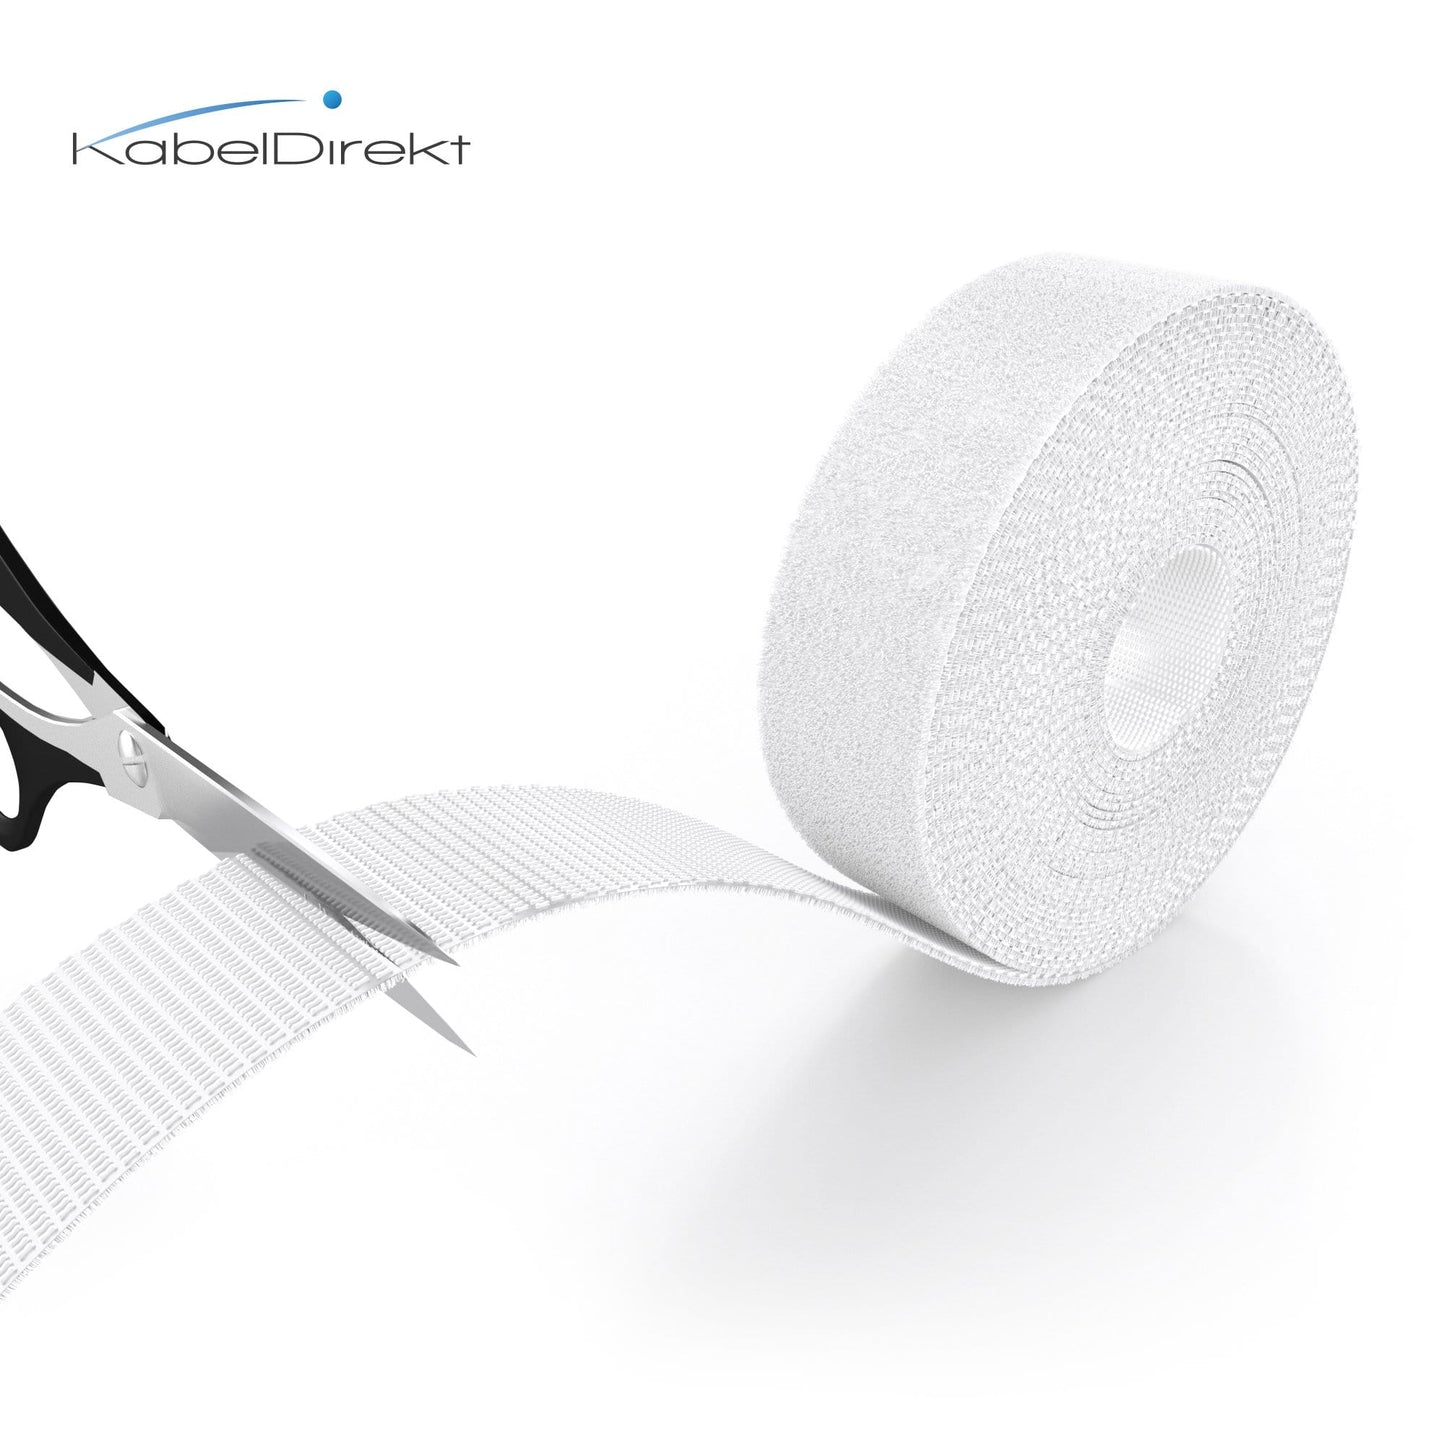 Hook & Loop Cable Straps – cut to size, reusable roll, white